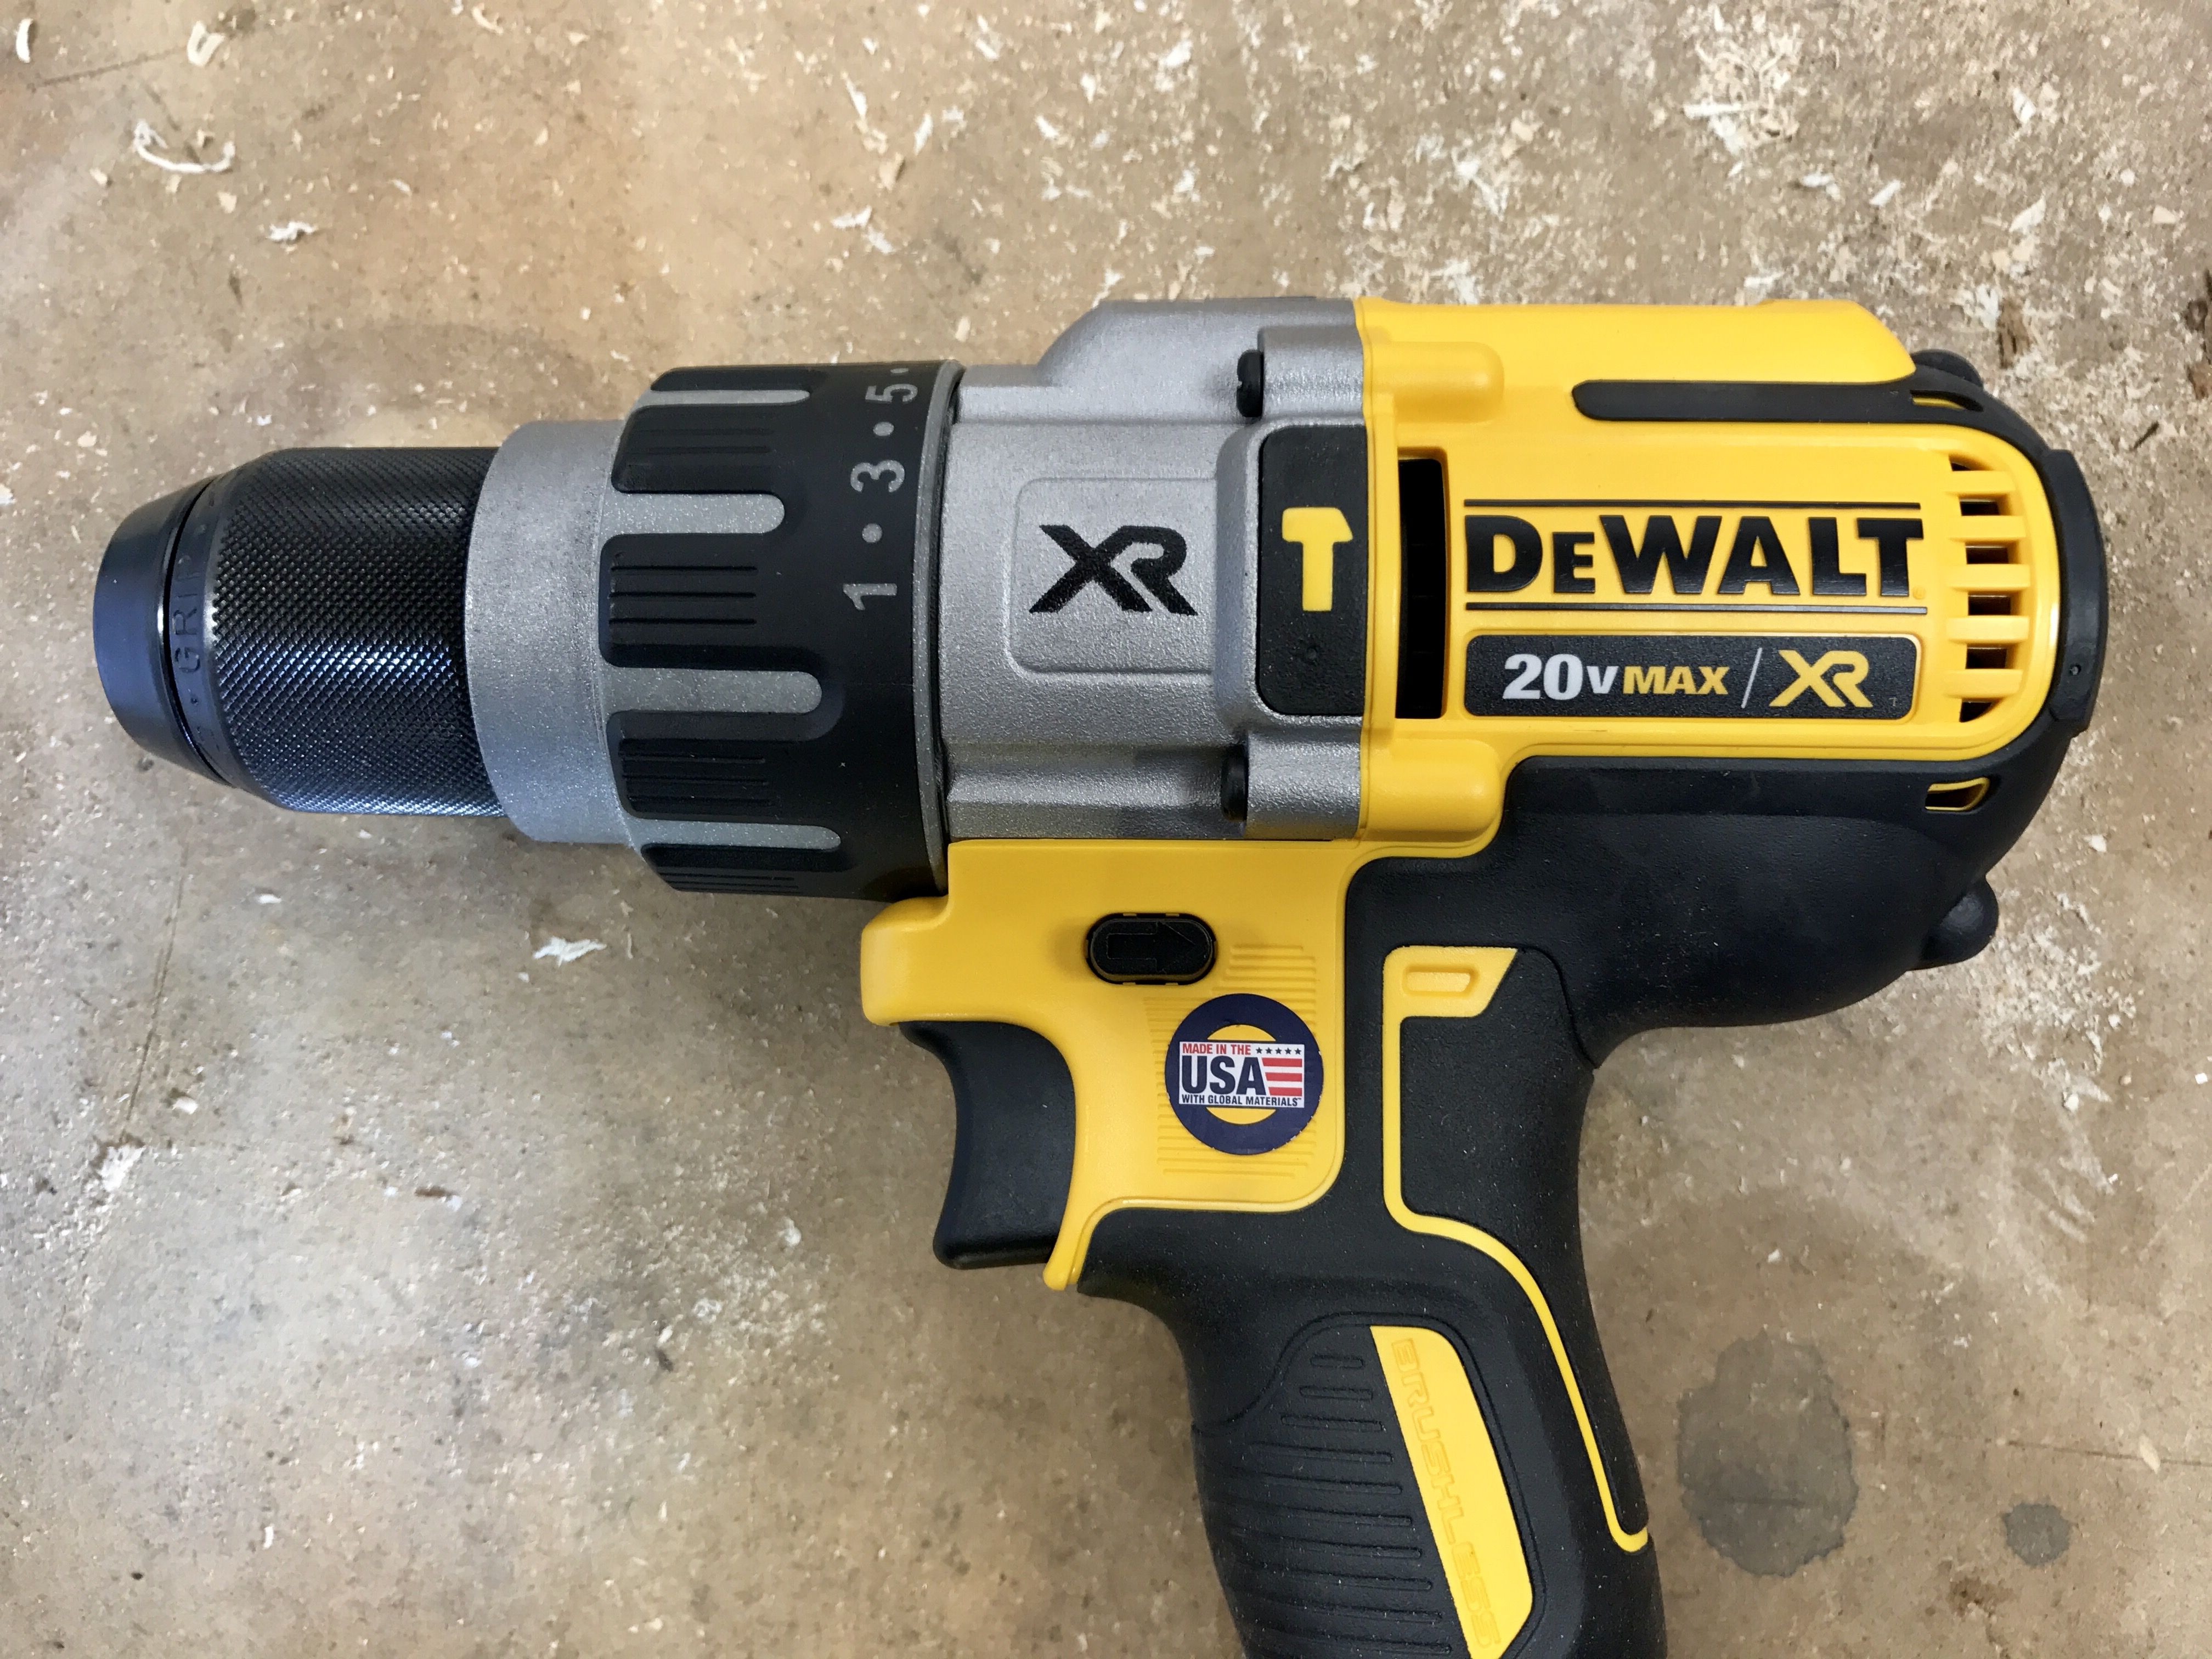 which power tools are made in the usa?